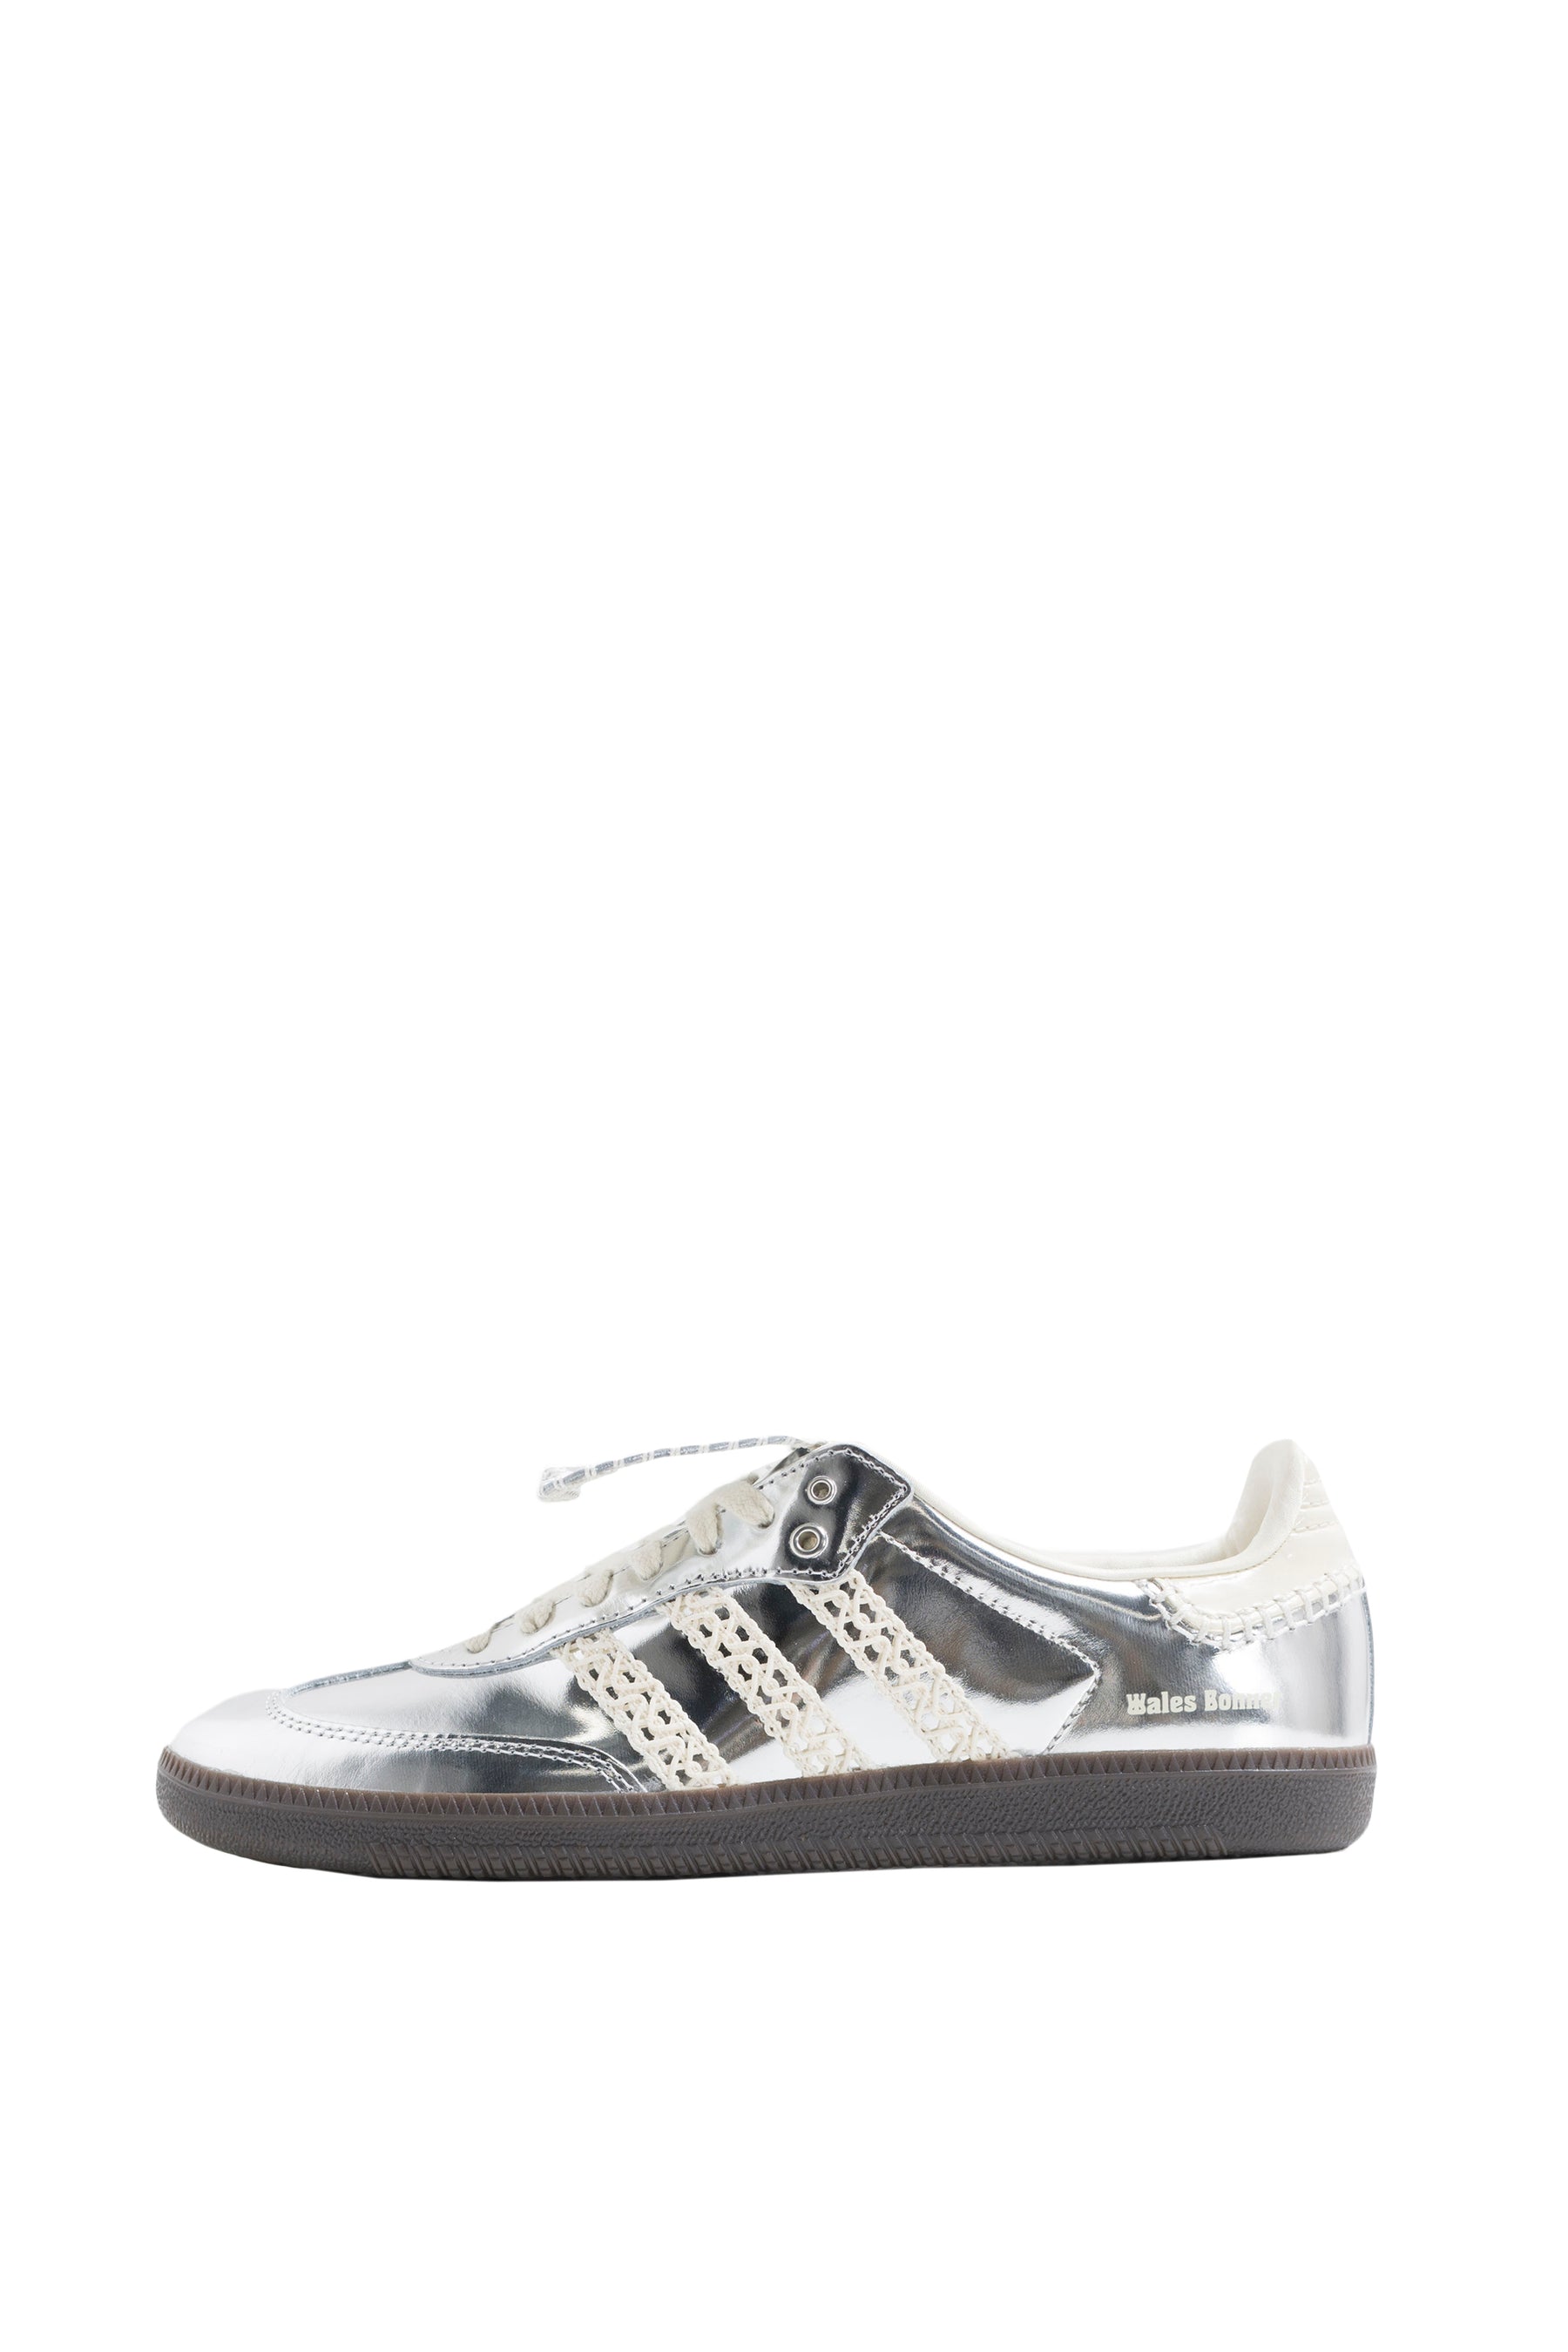 adidas×Wales Bonner SS23 WB SILVER SAMBA / SIL MET/CWHT/GRY ONE -NUBIAN